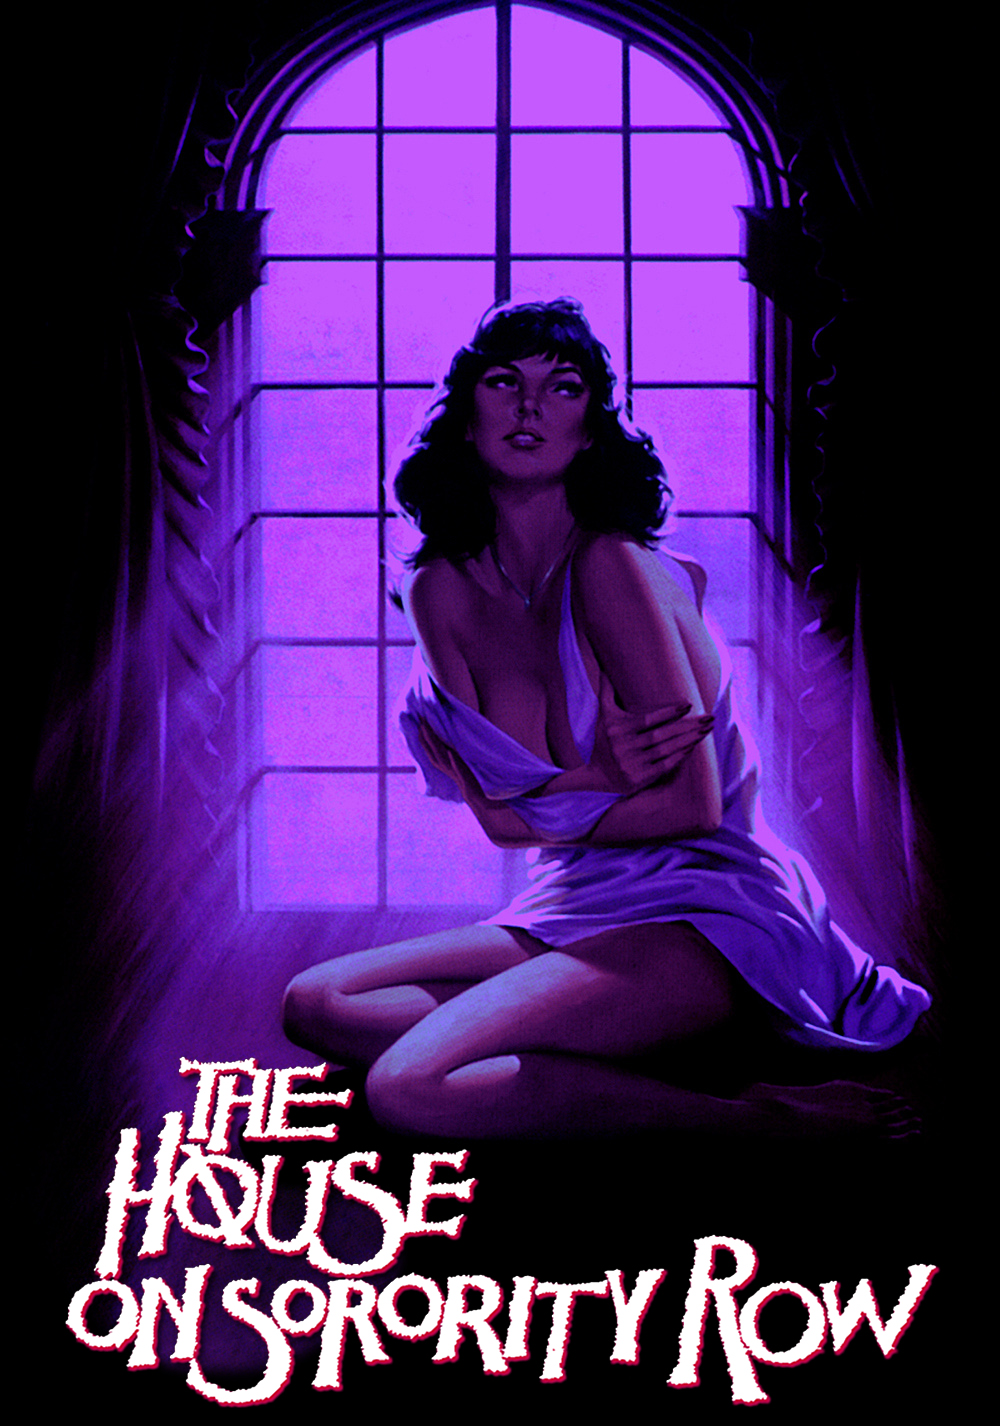 The House on Sorority Row online